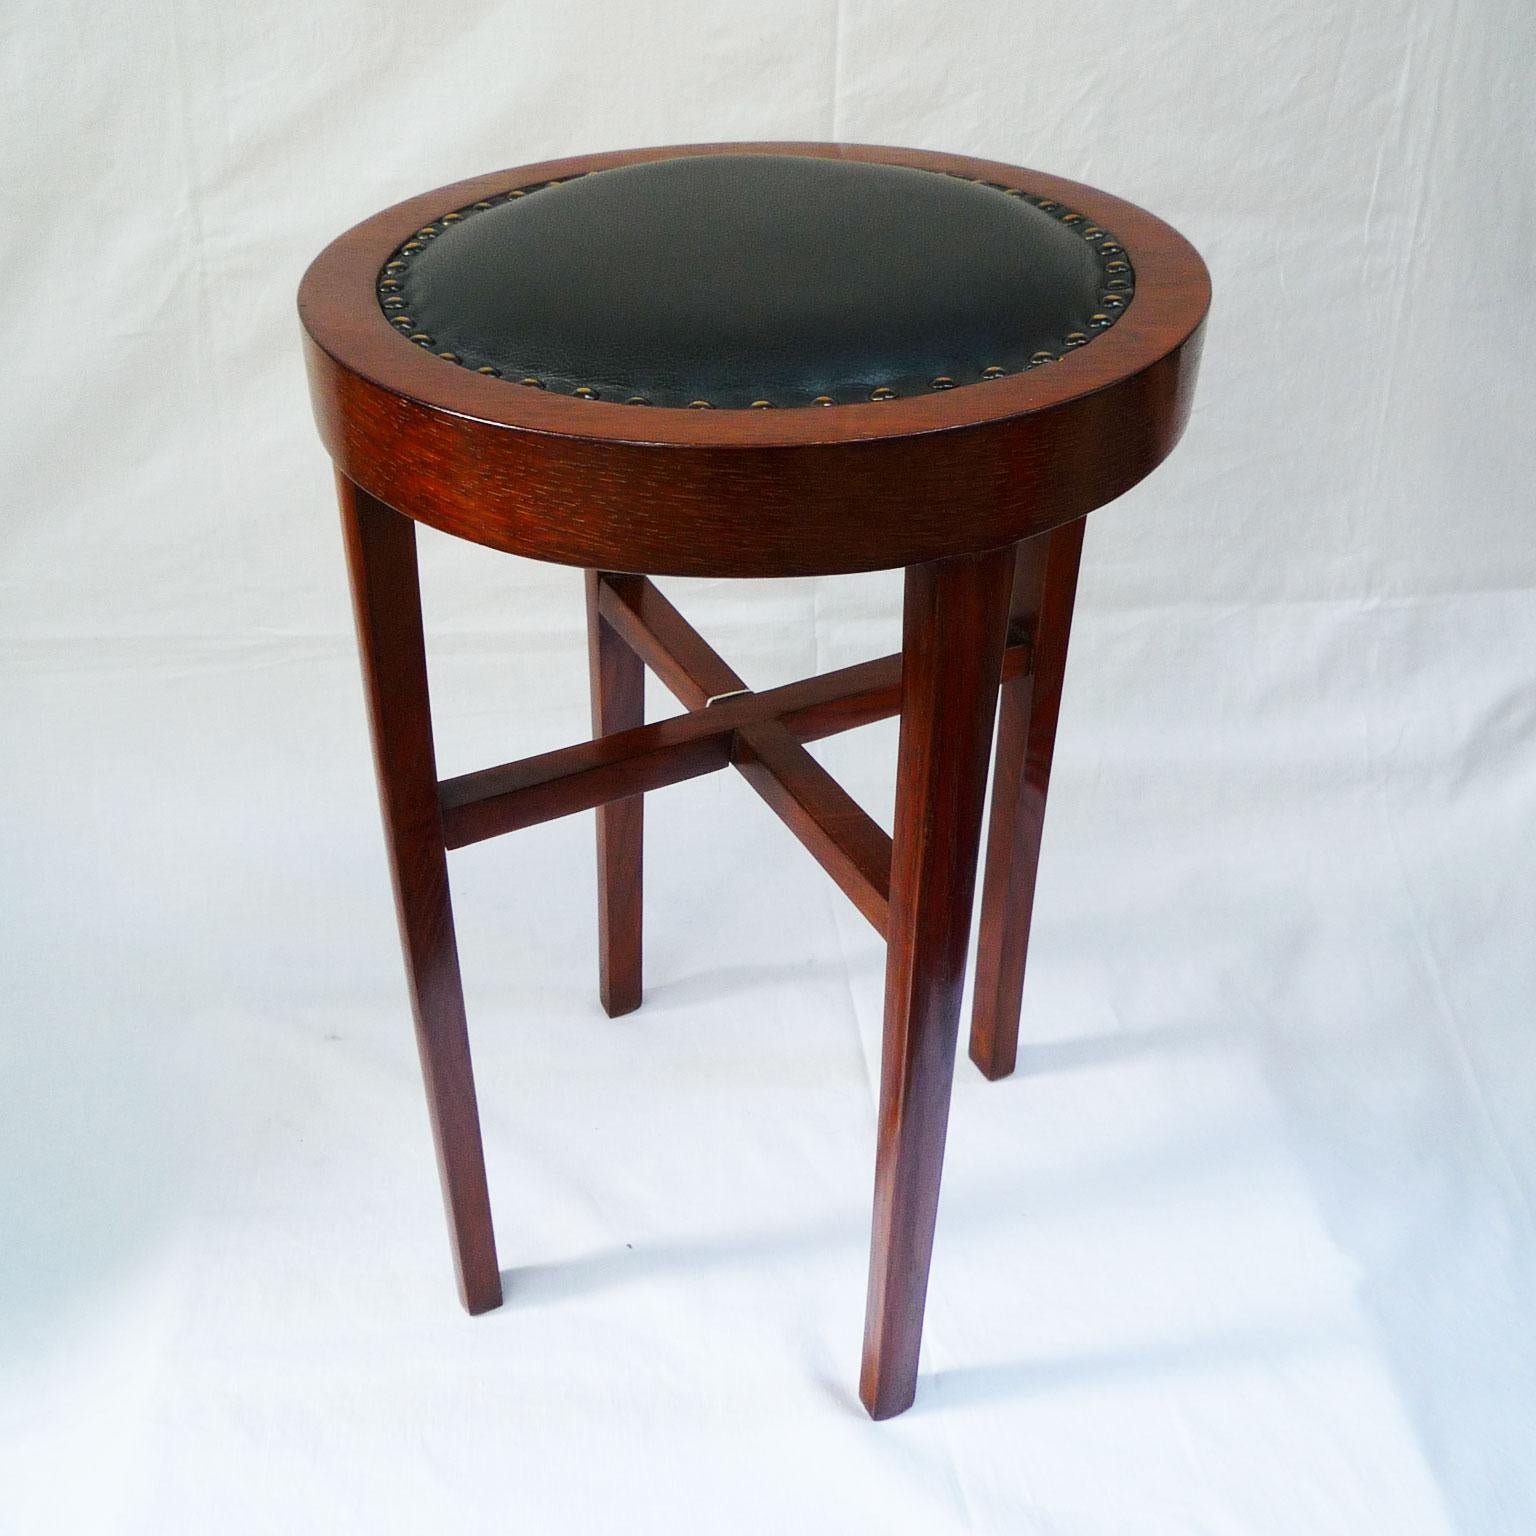 Neoclassical Classicist Stool with Leather Upholstery